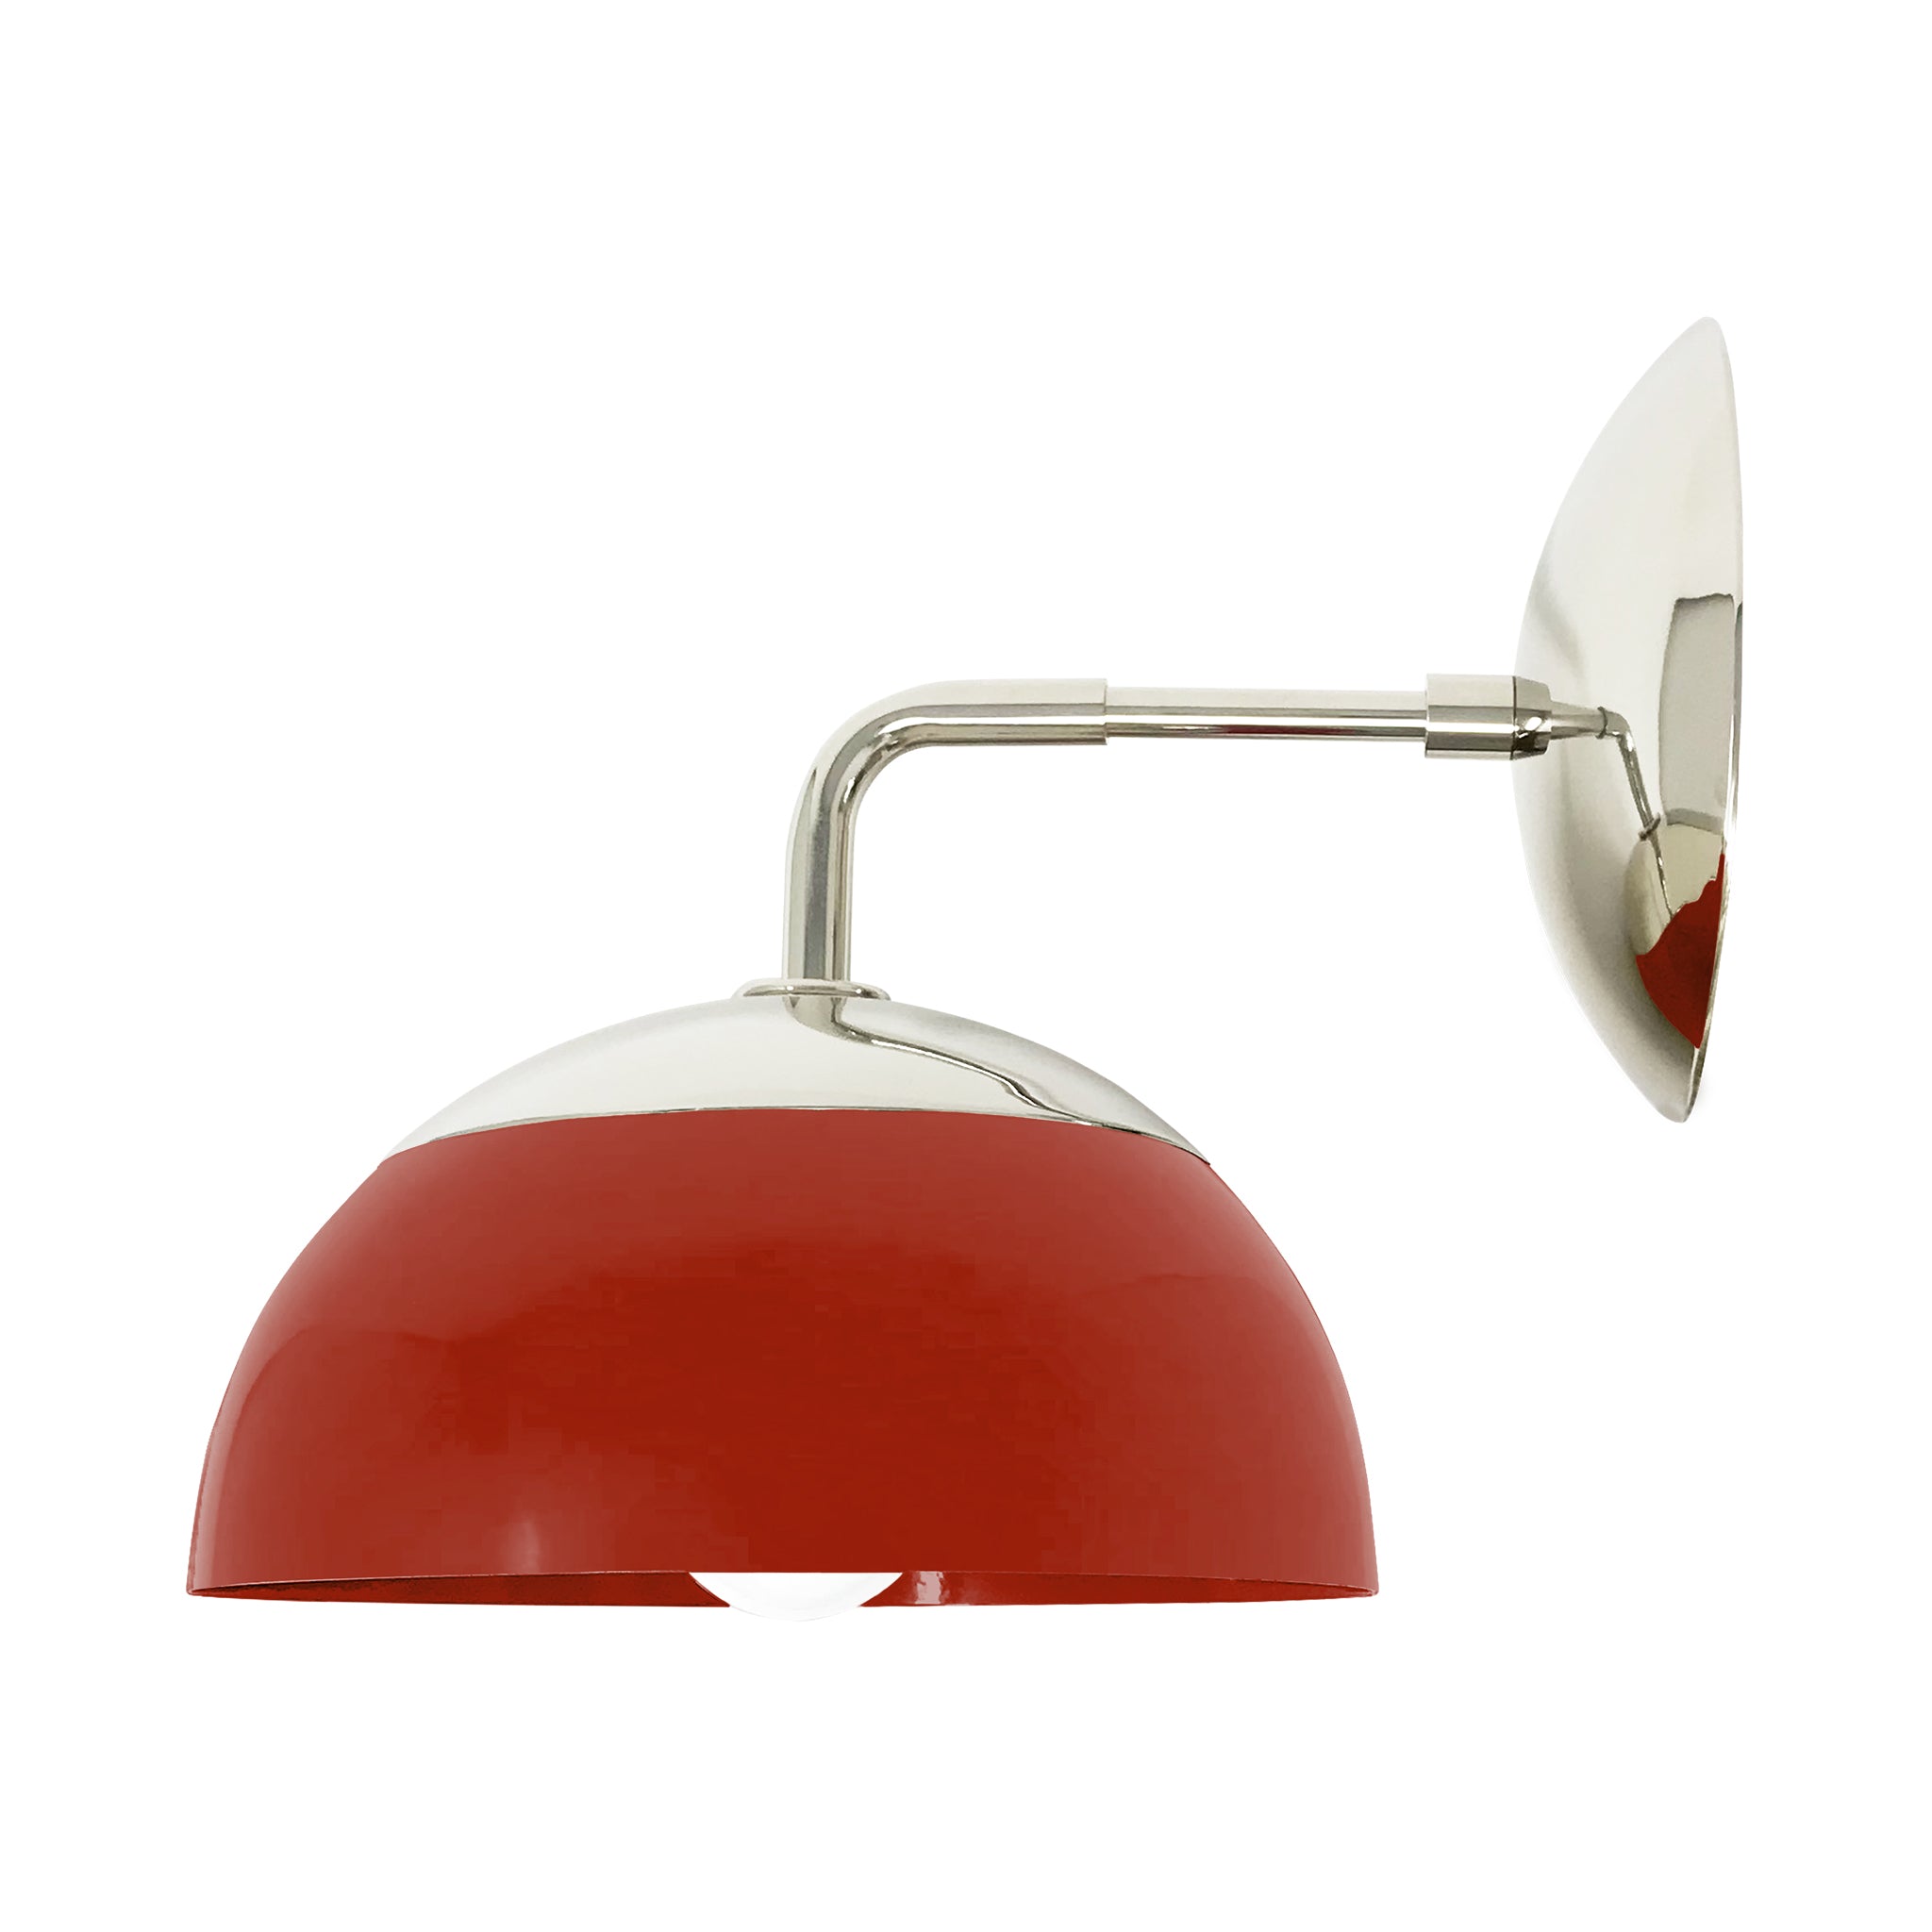 Nickel and riding hood red color Cadbury sconce 8" Dutton Brown lighting